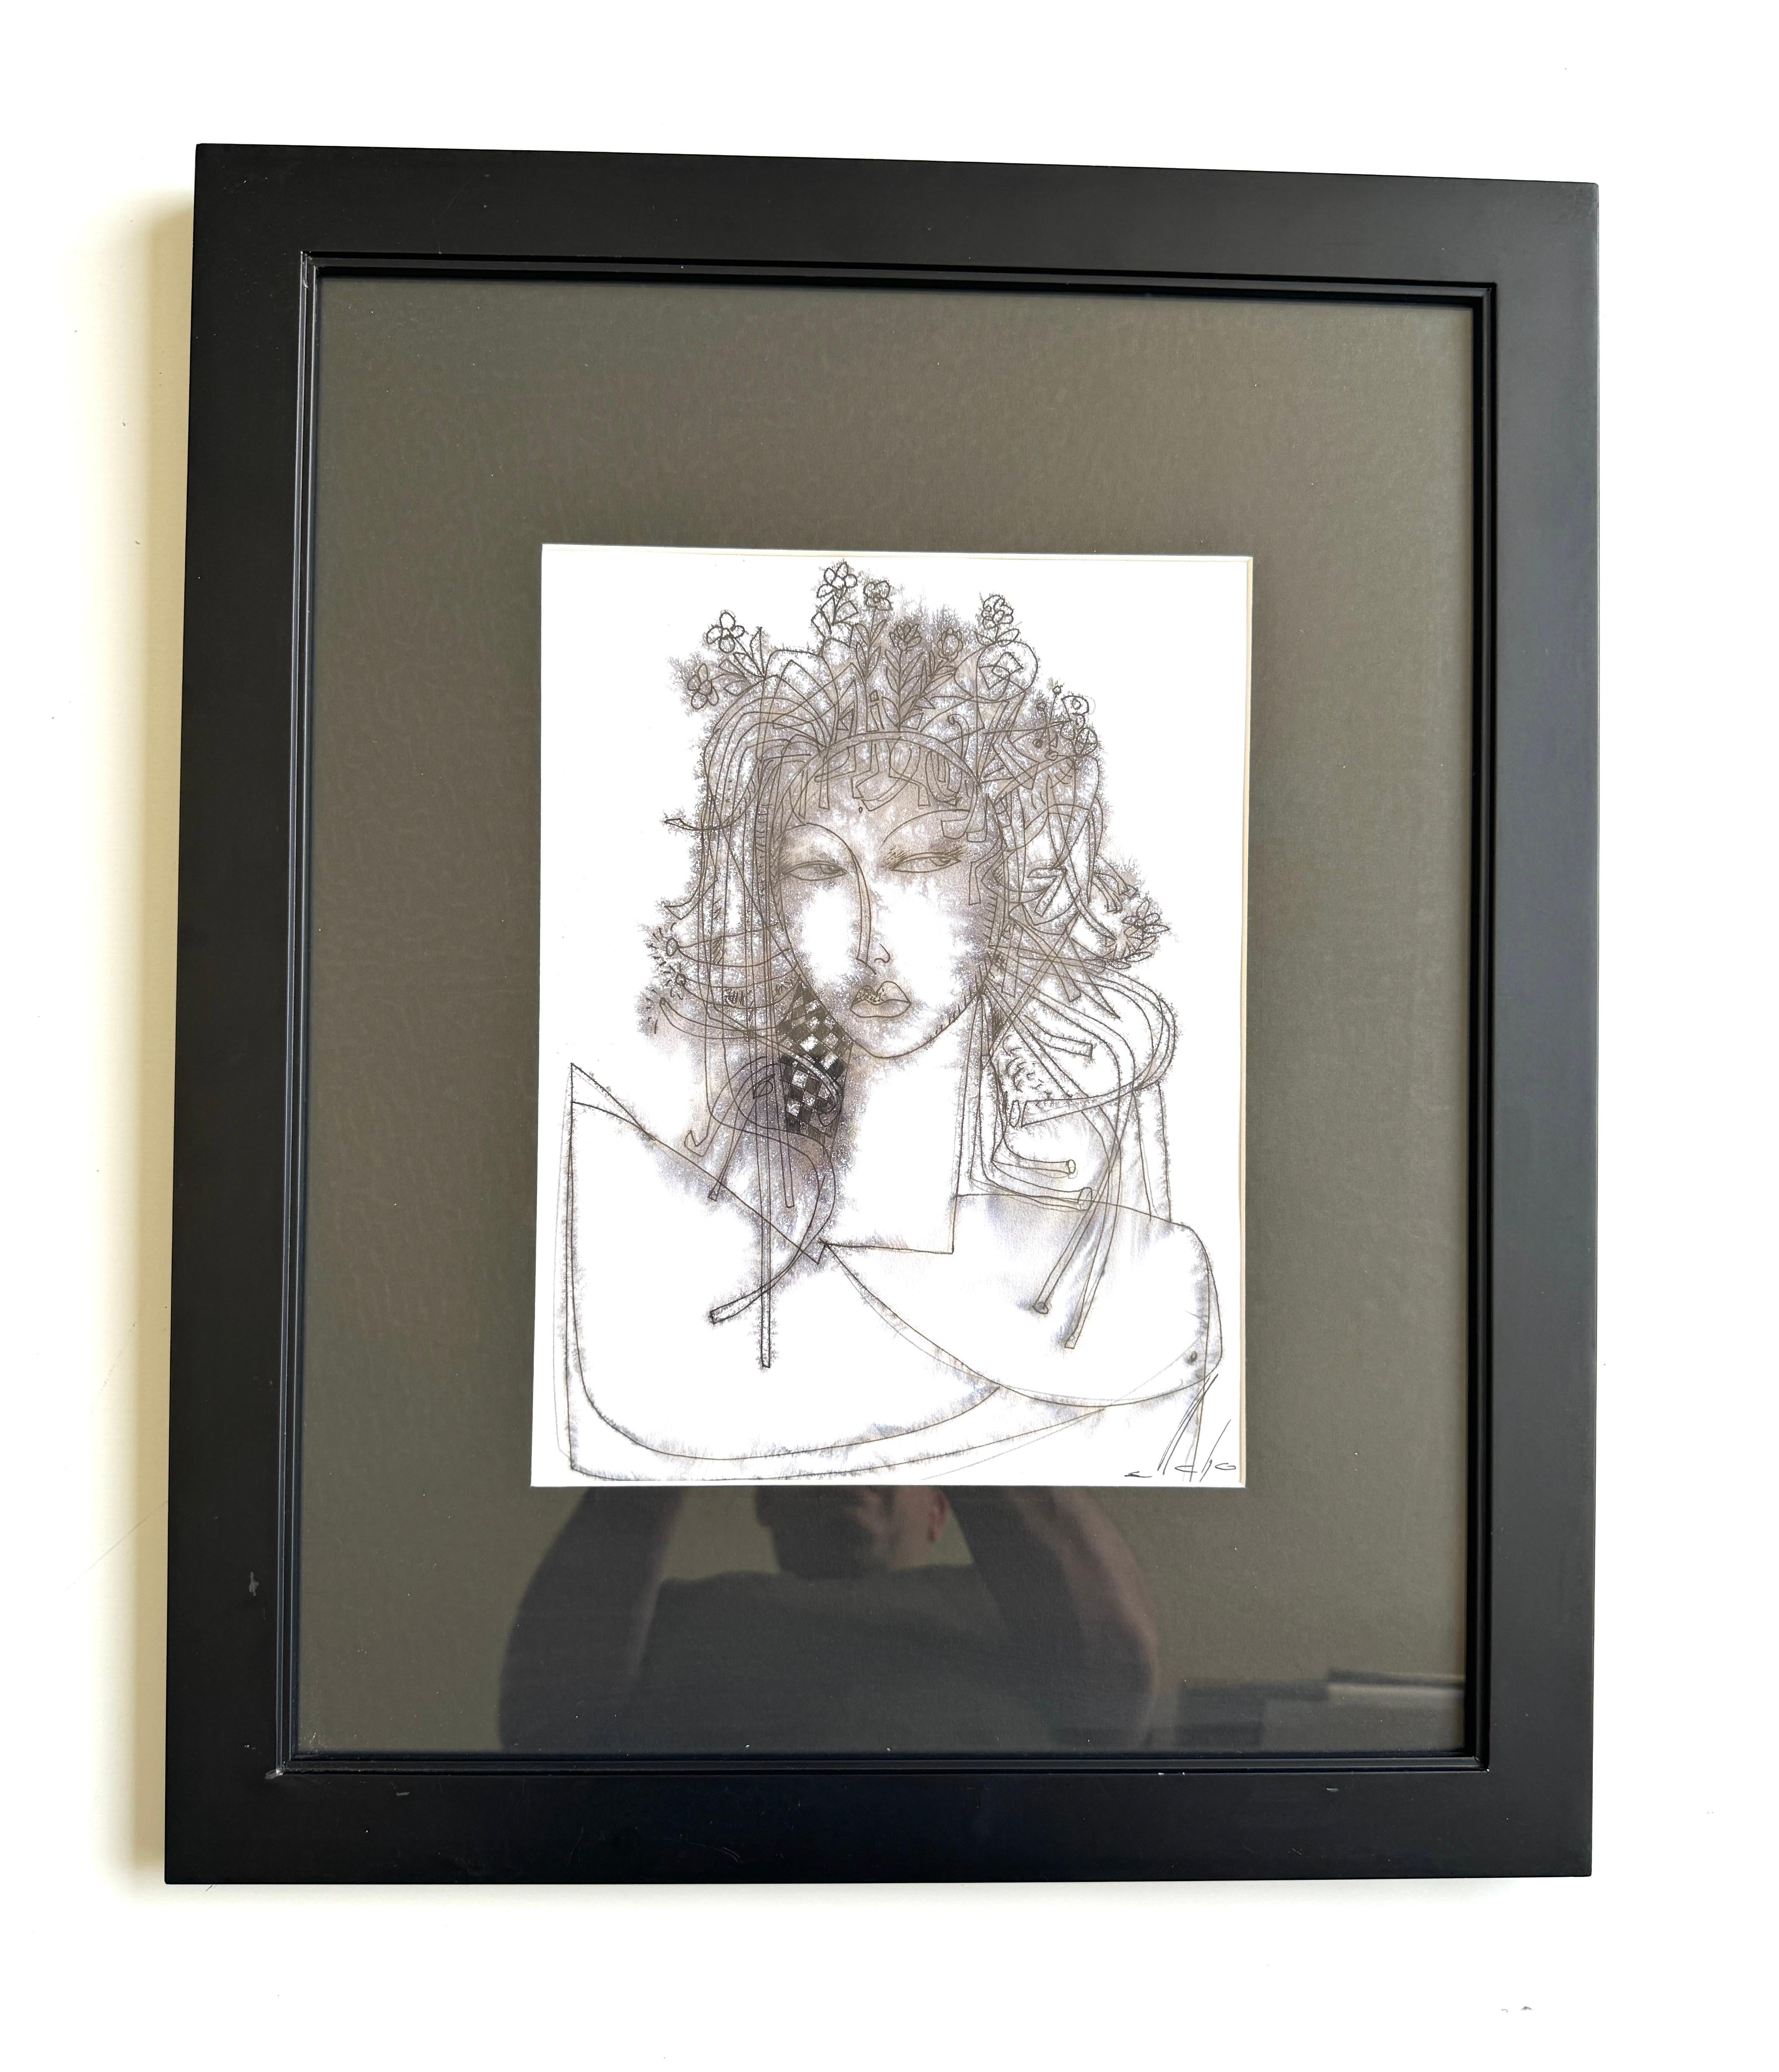 Artist: Mkrtich Sarkisyan (Mcho)
Work: Original Painting, Handmade Artwork, One of a Kind 
Medium: Ink on Paper 
Year: 2023
Style: Abstract Art
Title: Portrait
Size: 13